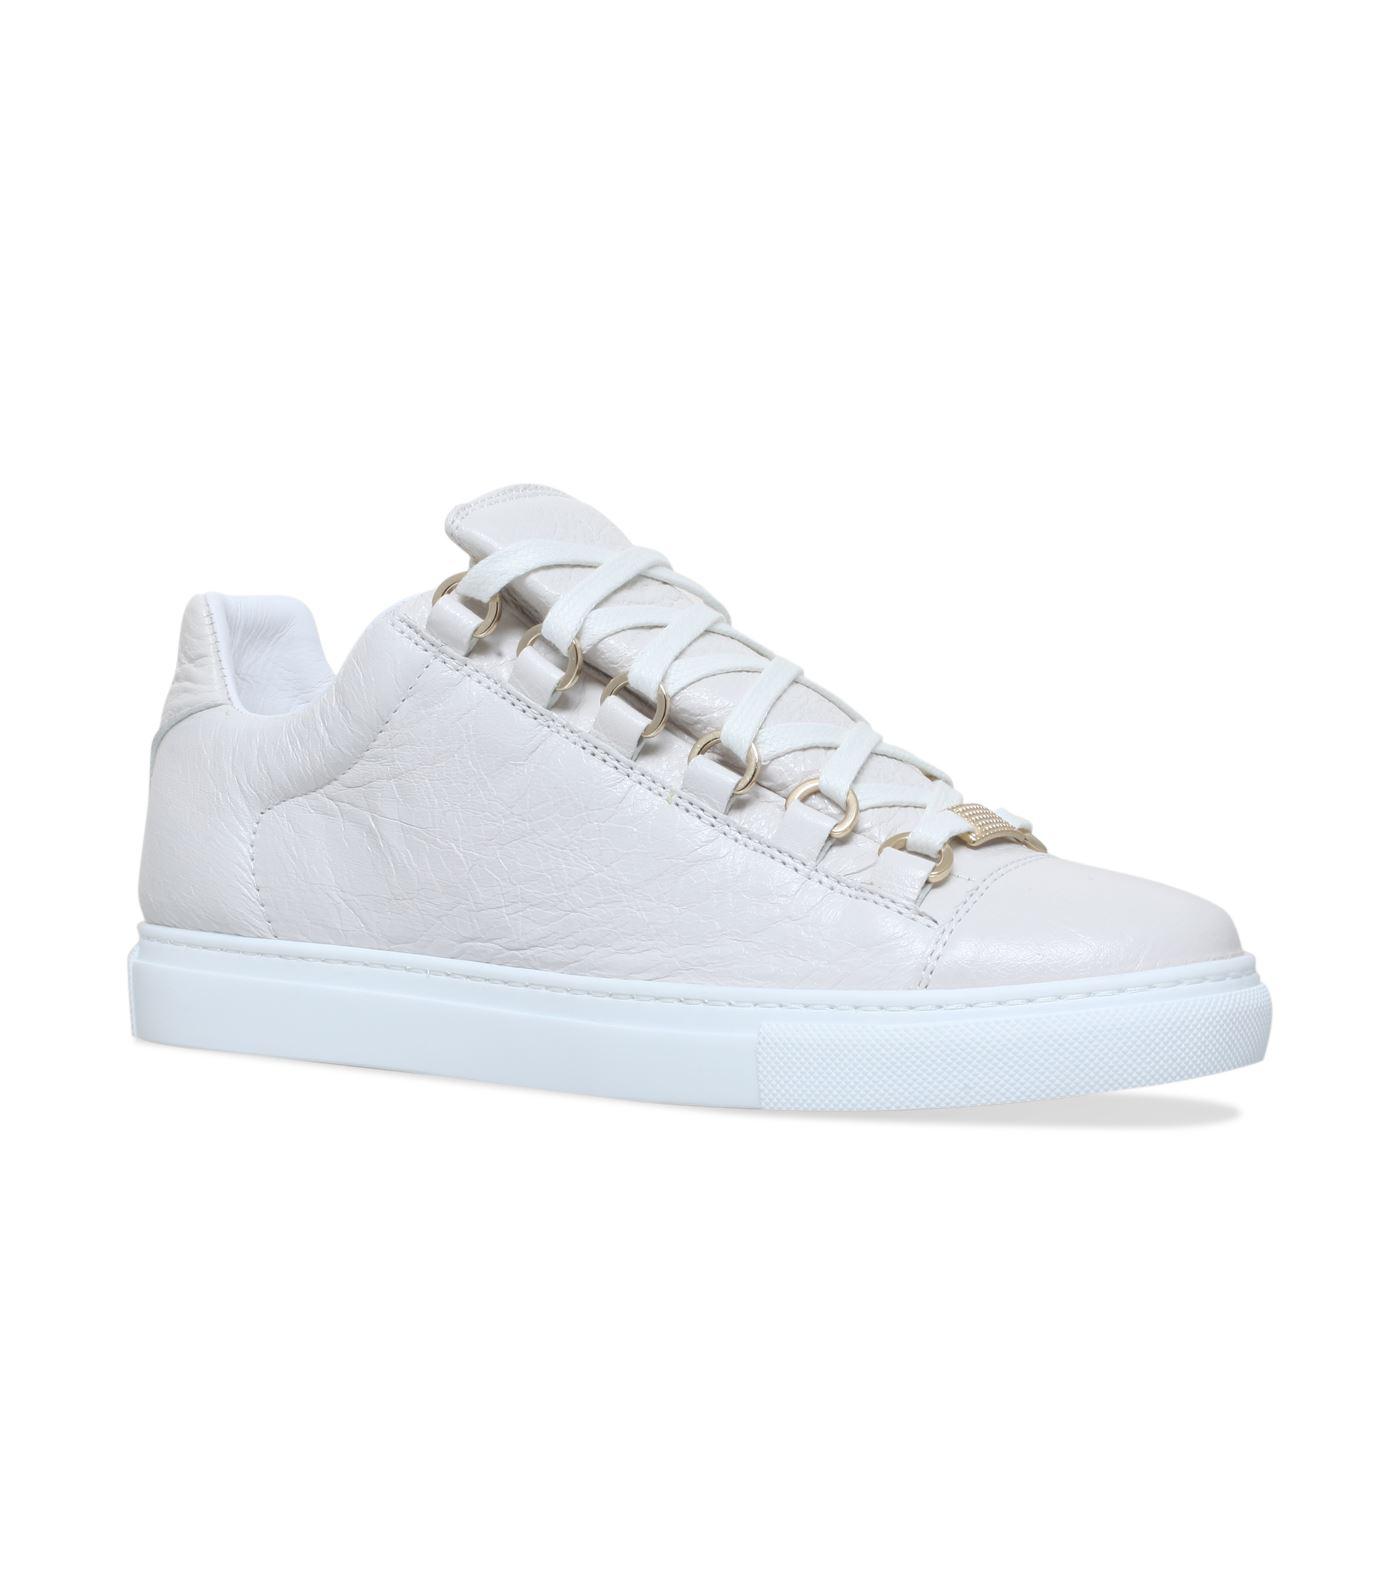 Balenciaga Arena Low Top Sneakers in White | Lyst UK